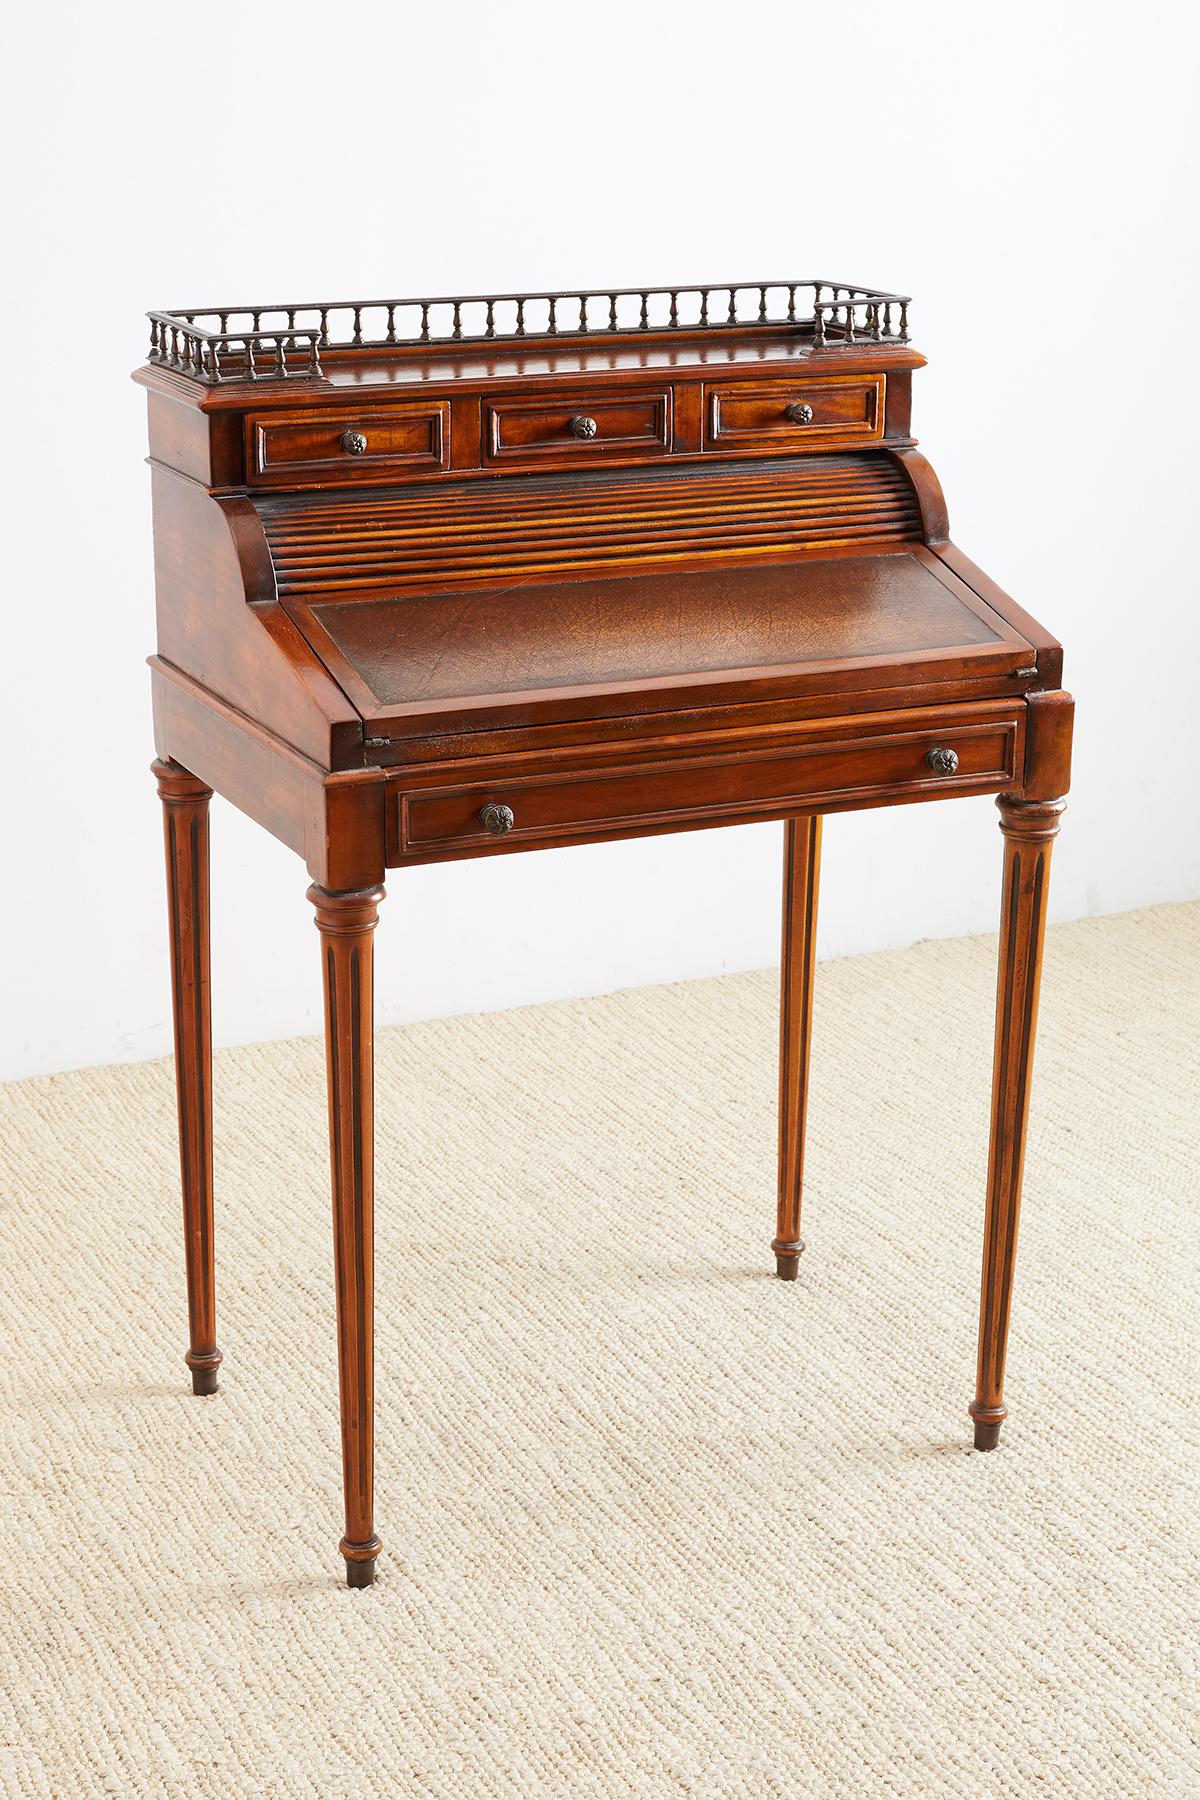 Elegant French Louis XVI style mahogany tambour writing table or desk also known as a Bureau De Dame, or cylinder desk. Features a roll top design with a flip top leather writing surface that measures 24 by 16 inches. Created by Maitland-Smith's